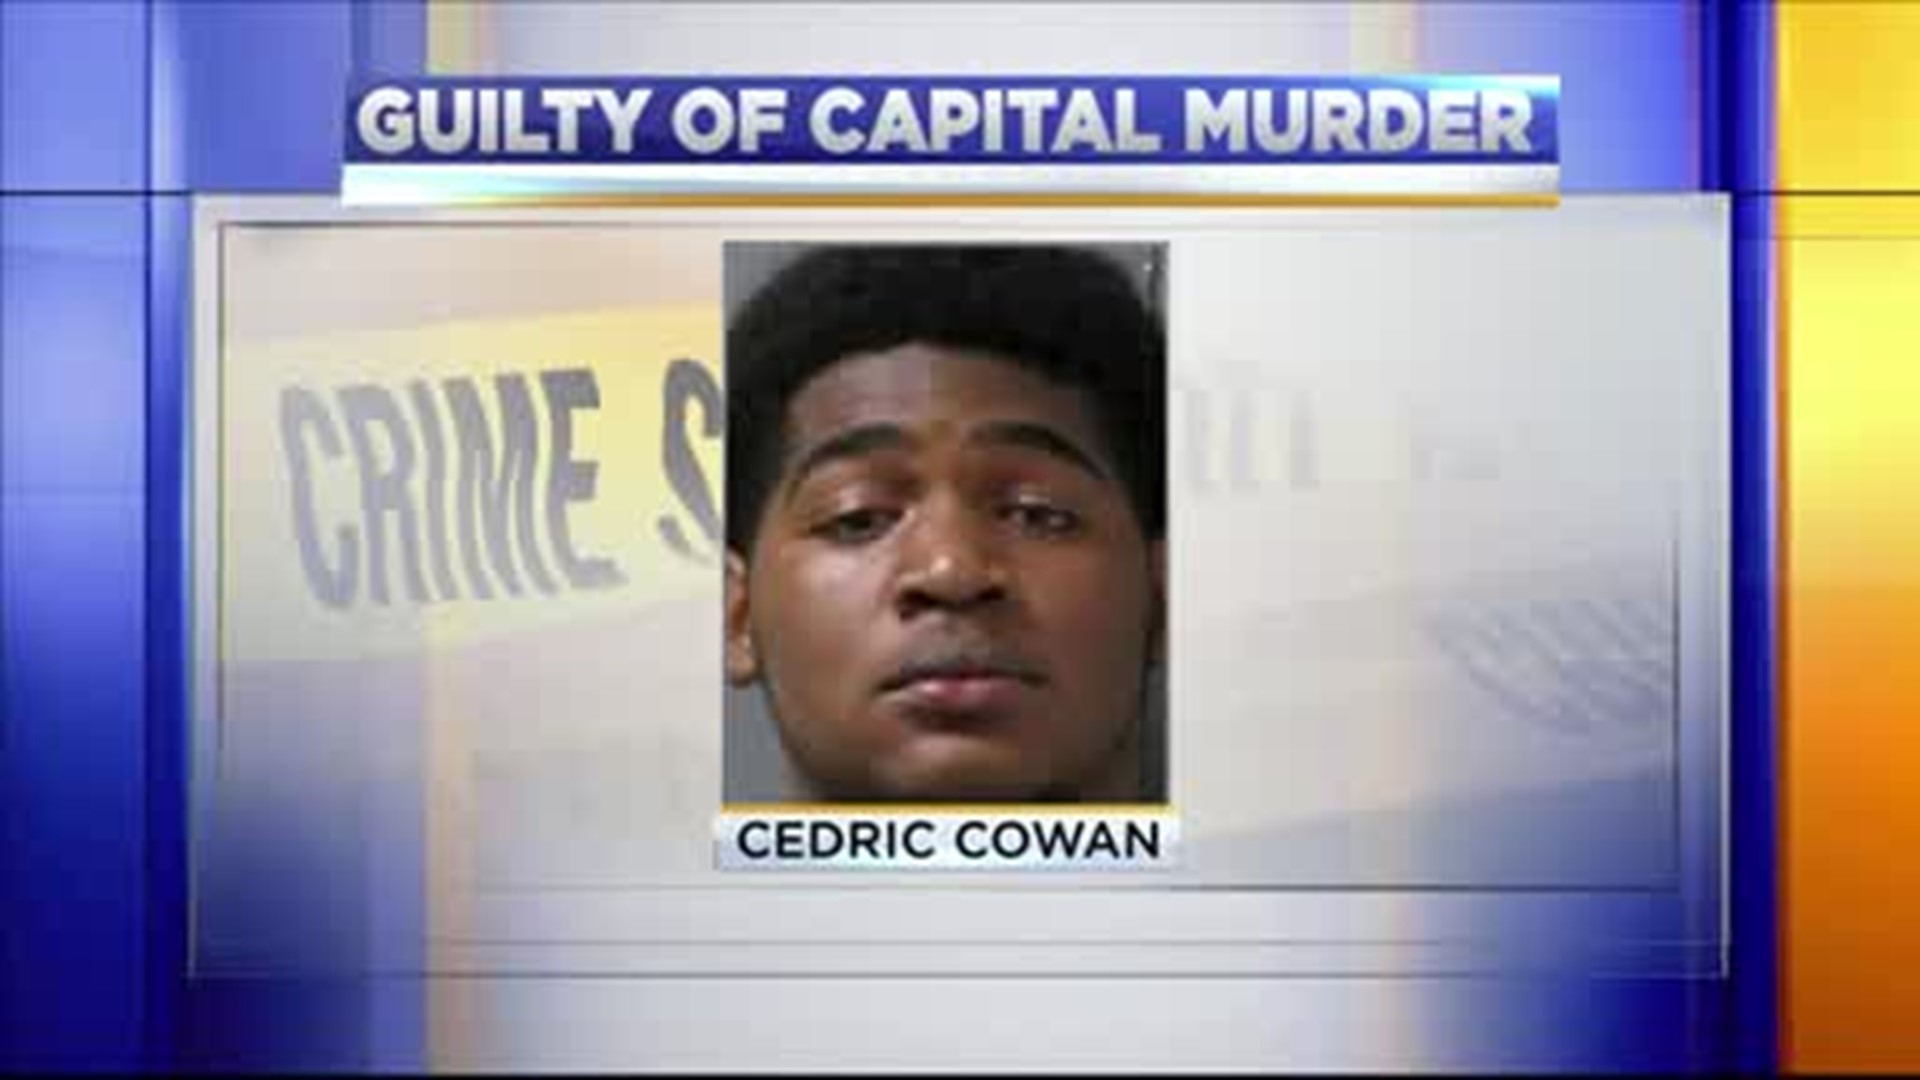 A Decatur jury says a 16-year-old killed two men in cold blood back in 2015. Cedric Cowan, now 20, was found guilty Thursday on three counts of capital murder. The third count was for killing two people at once.